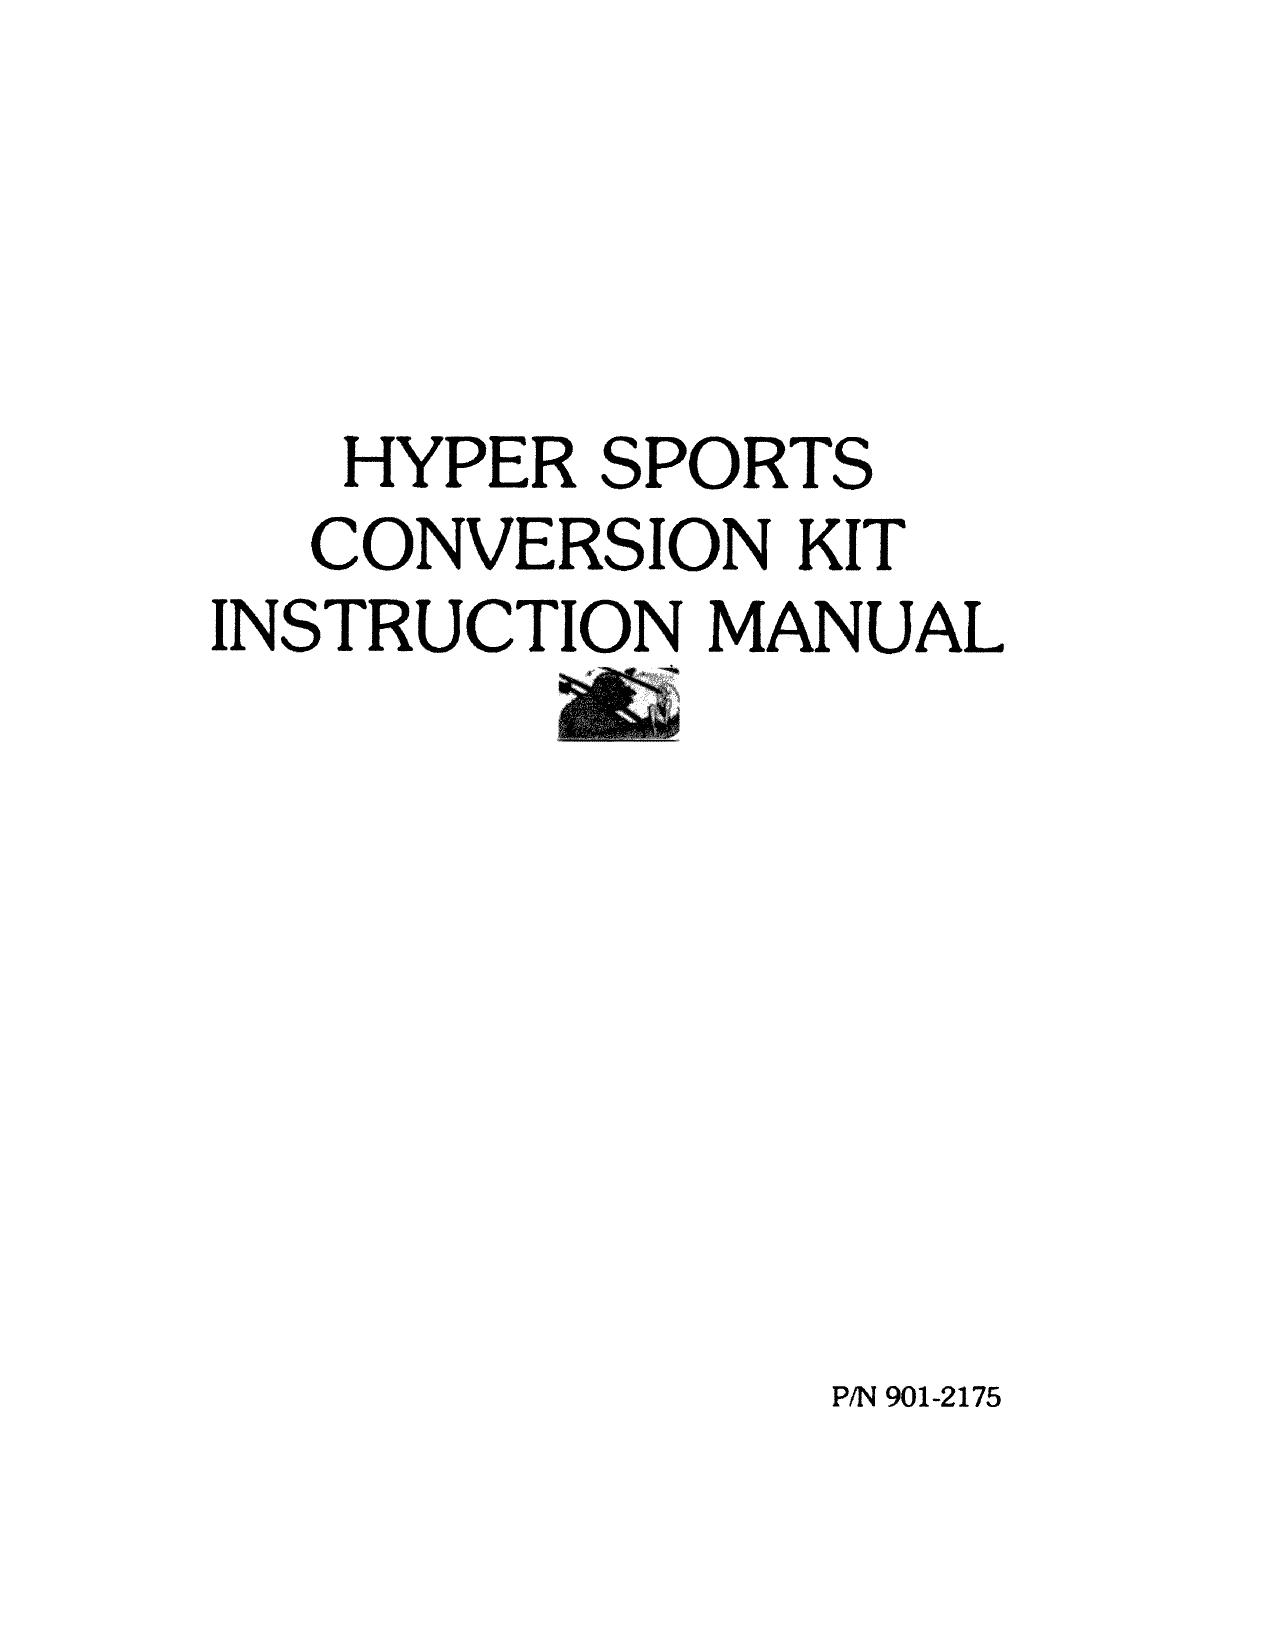 HyperSports Manual